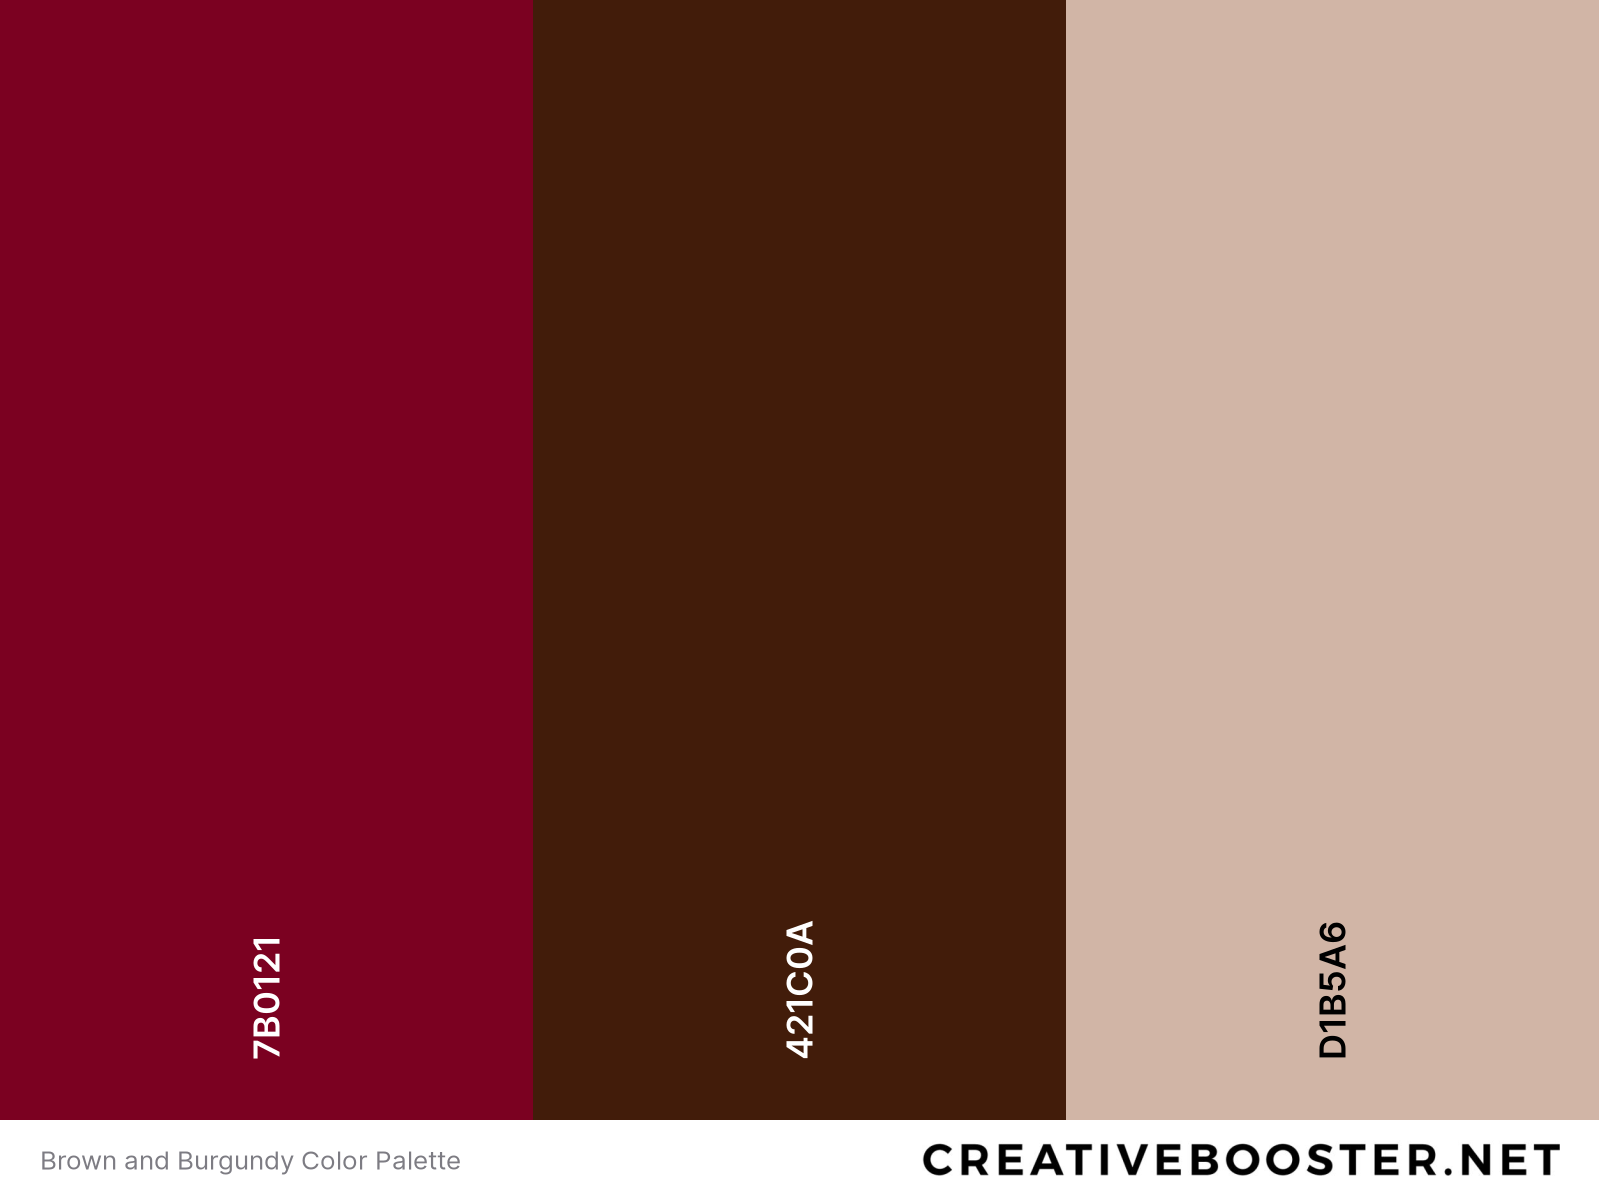 Brown and Burgundy Color Palette